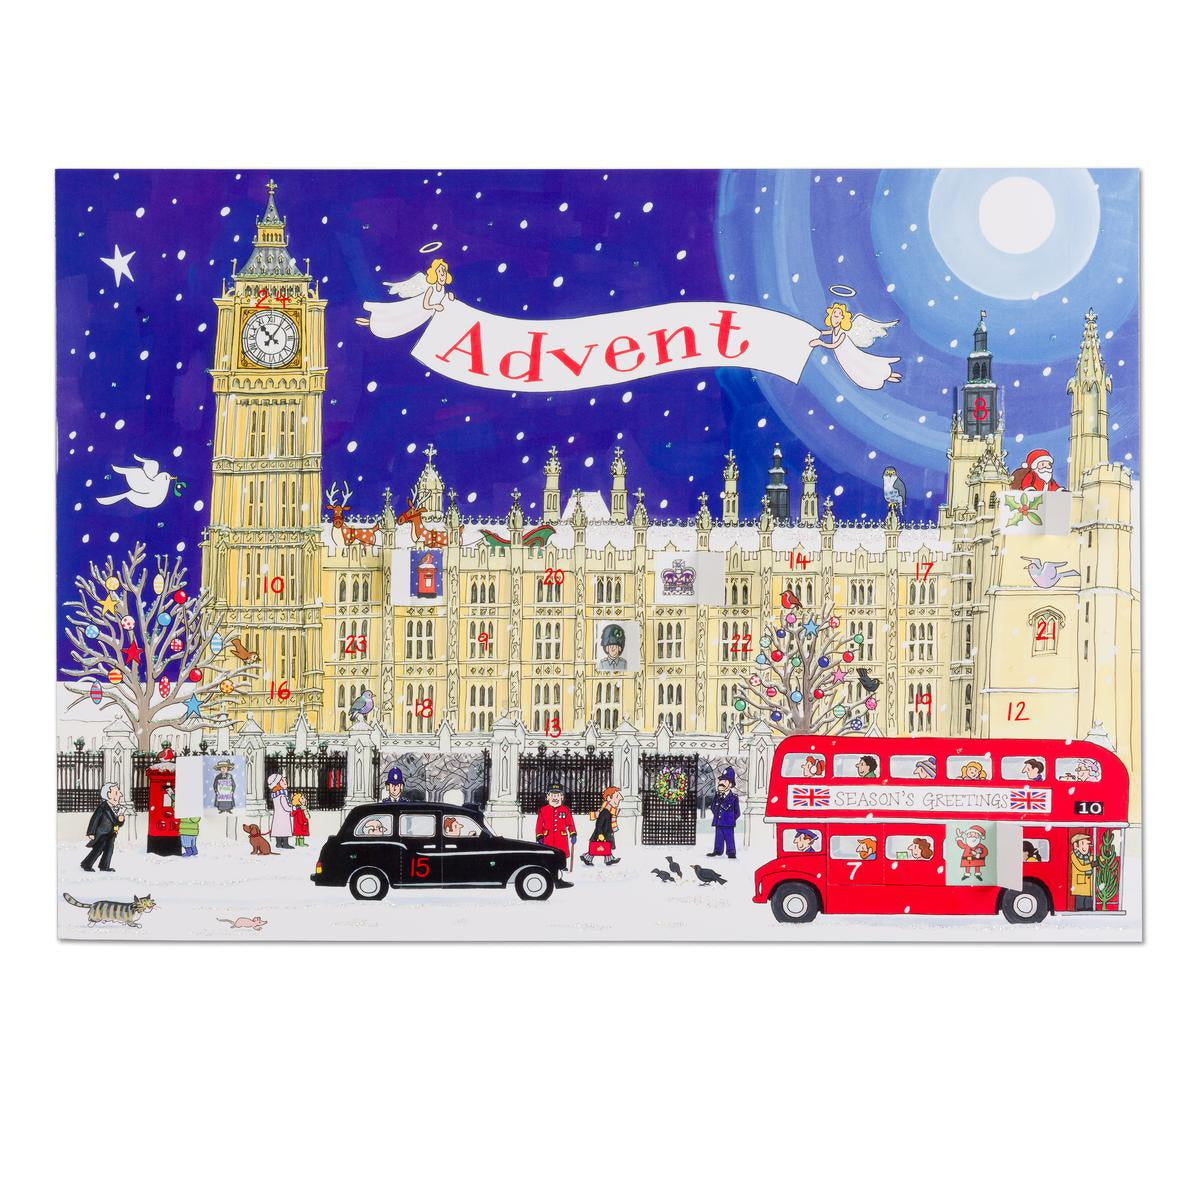 Alison Gardiner Christmas at the Palace of Westminster 1000 pice Jigsaw Puzzle